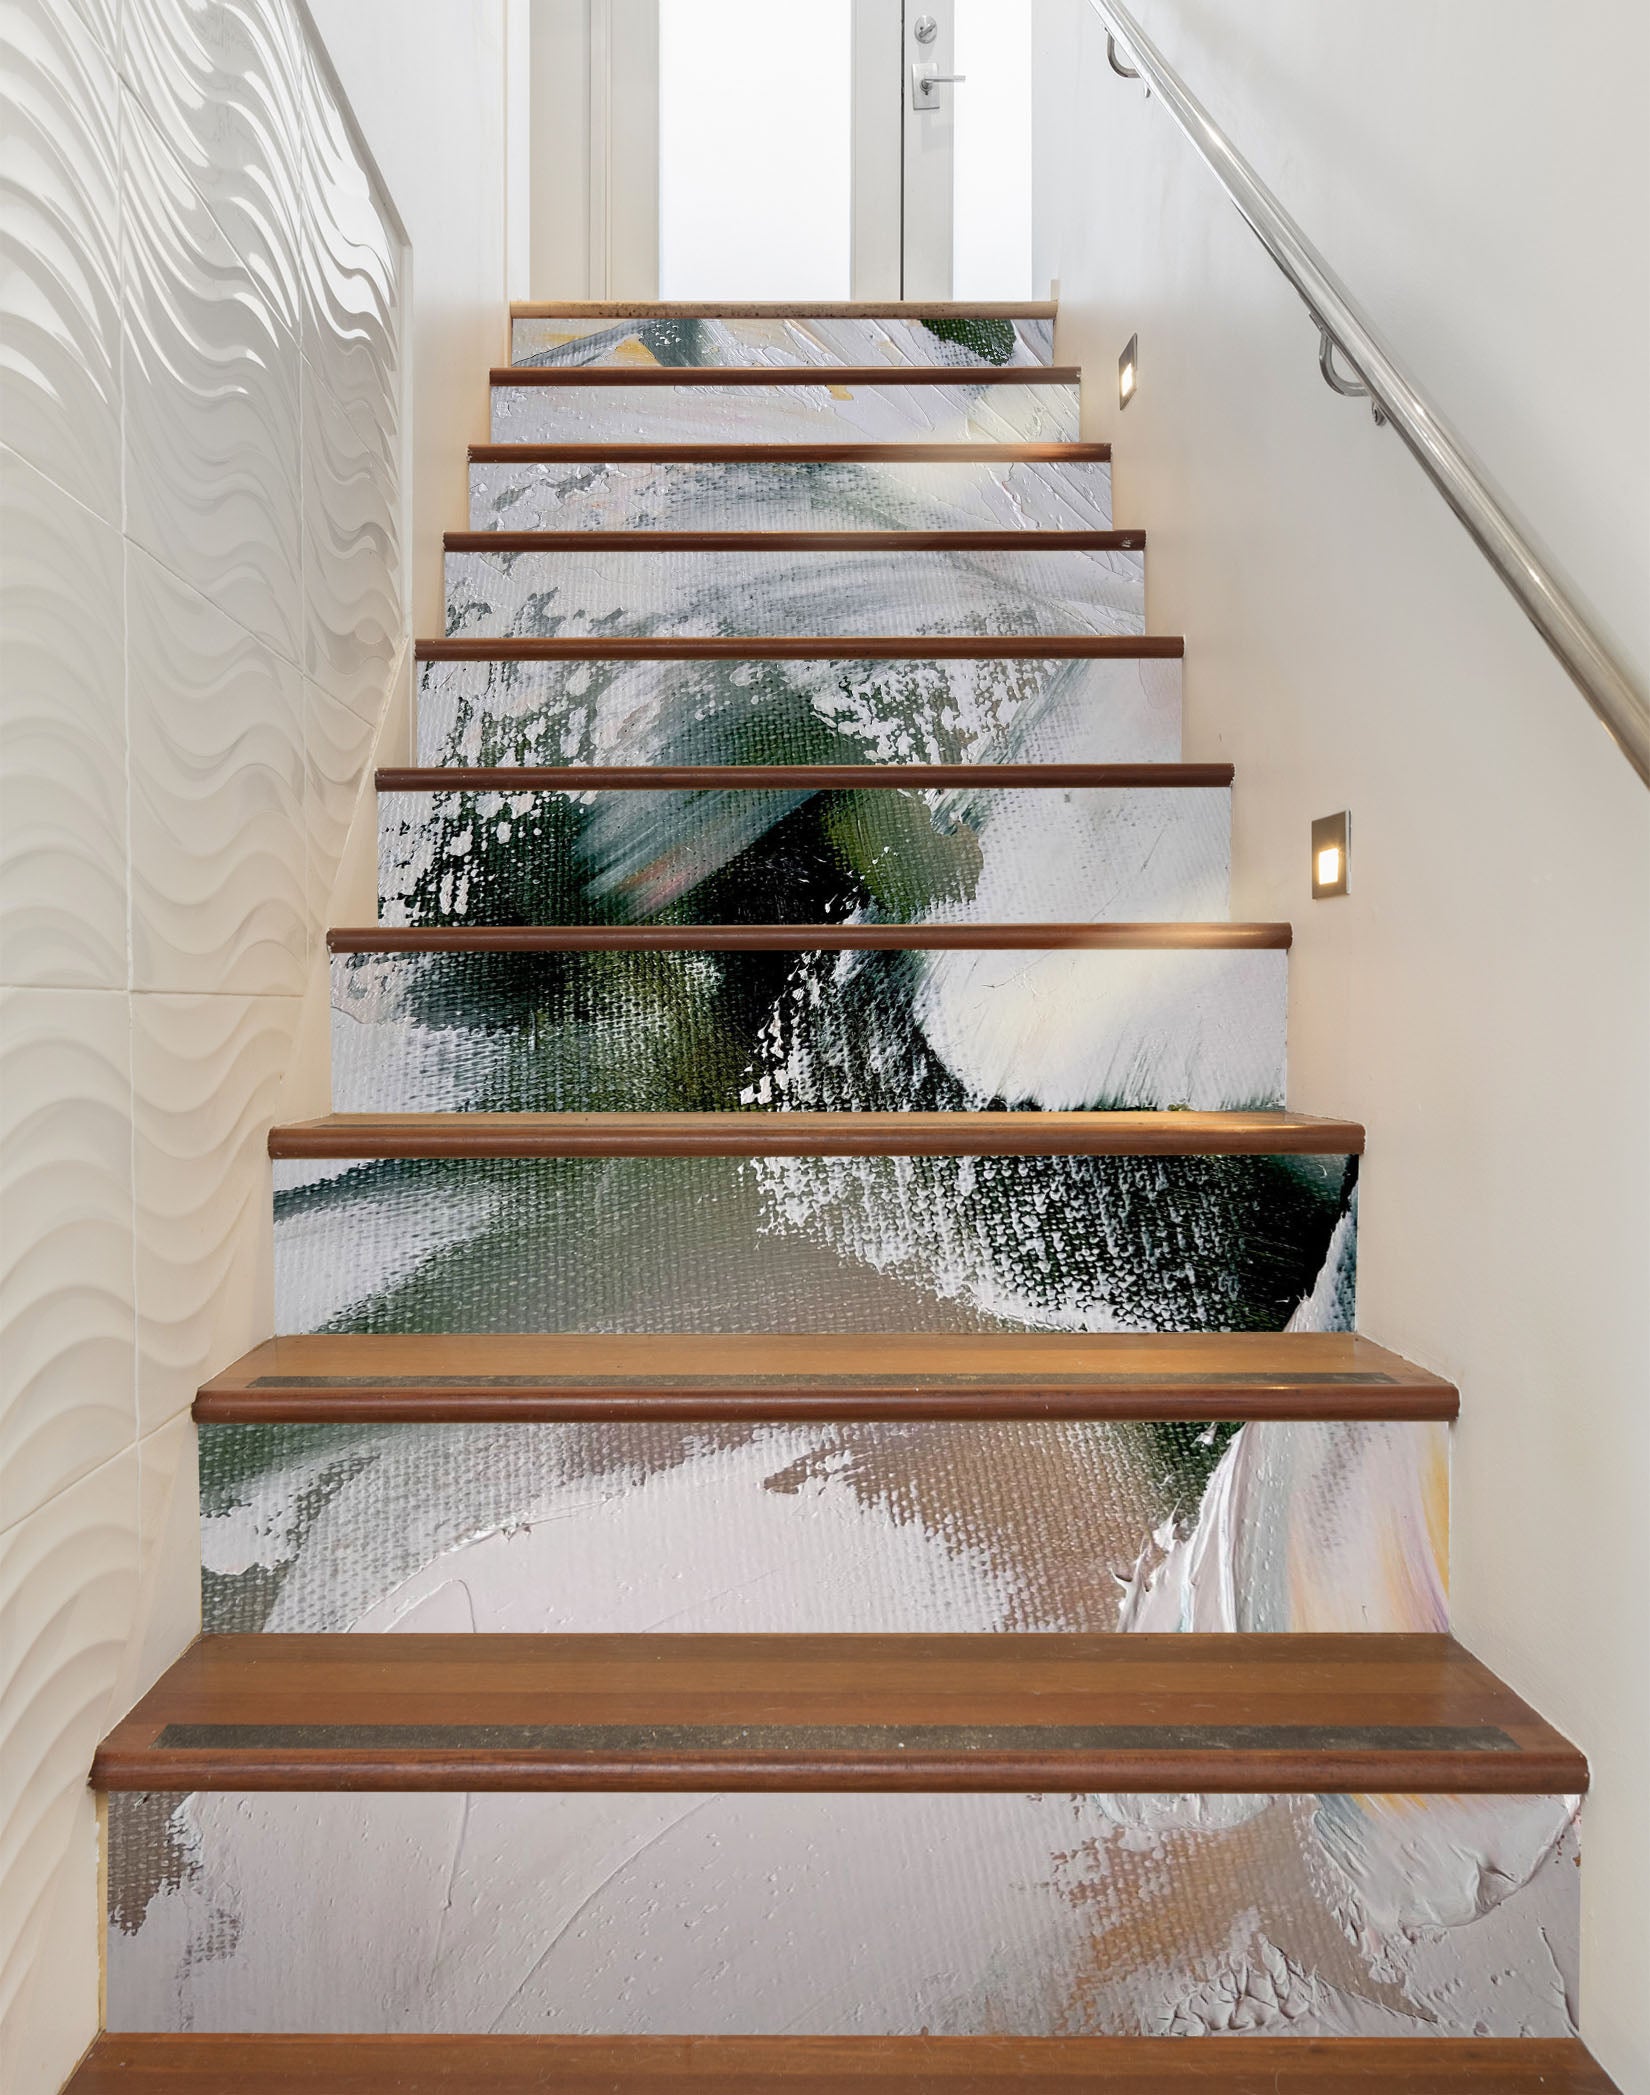 3D Abstract Painting 2203 Skromova Marina Stair Risers